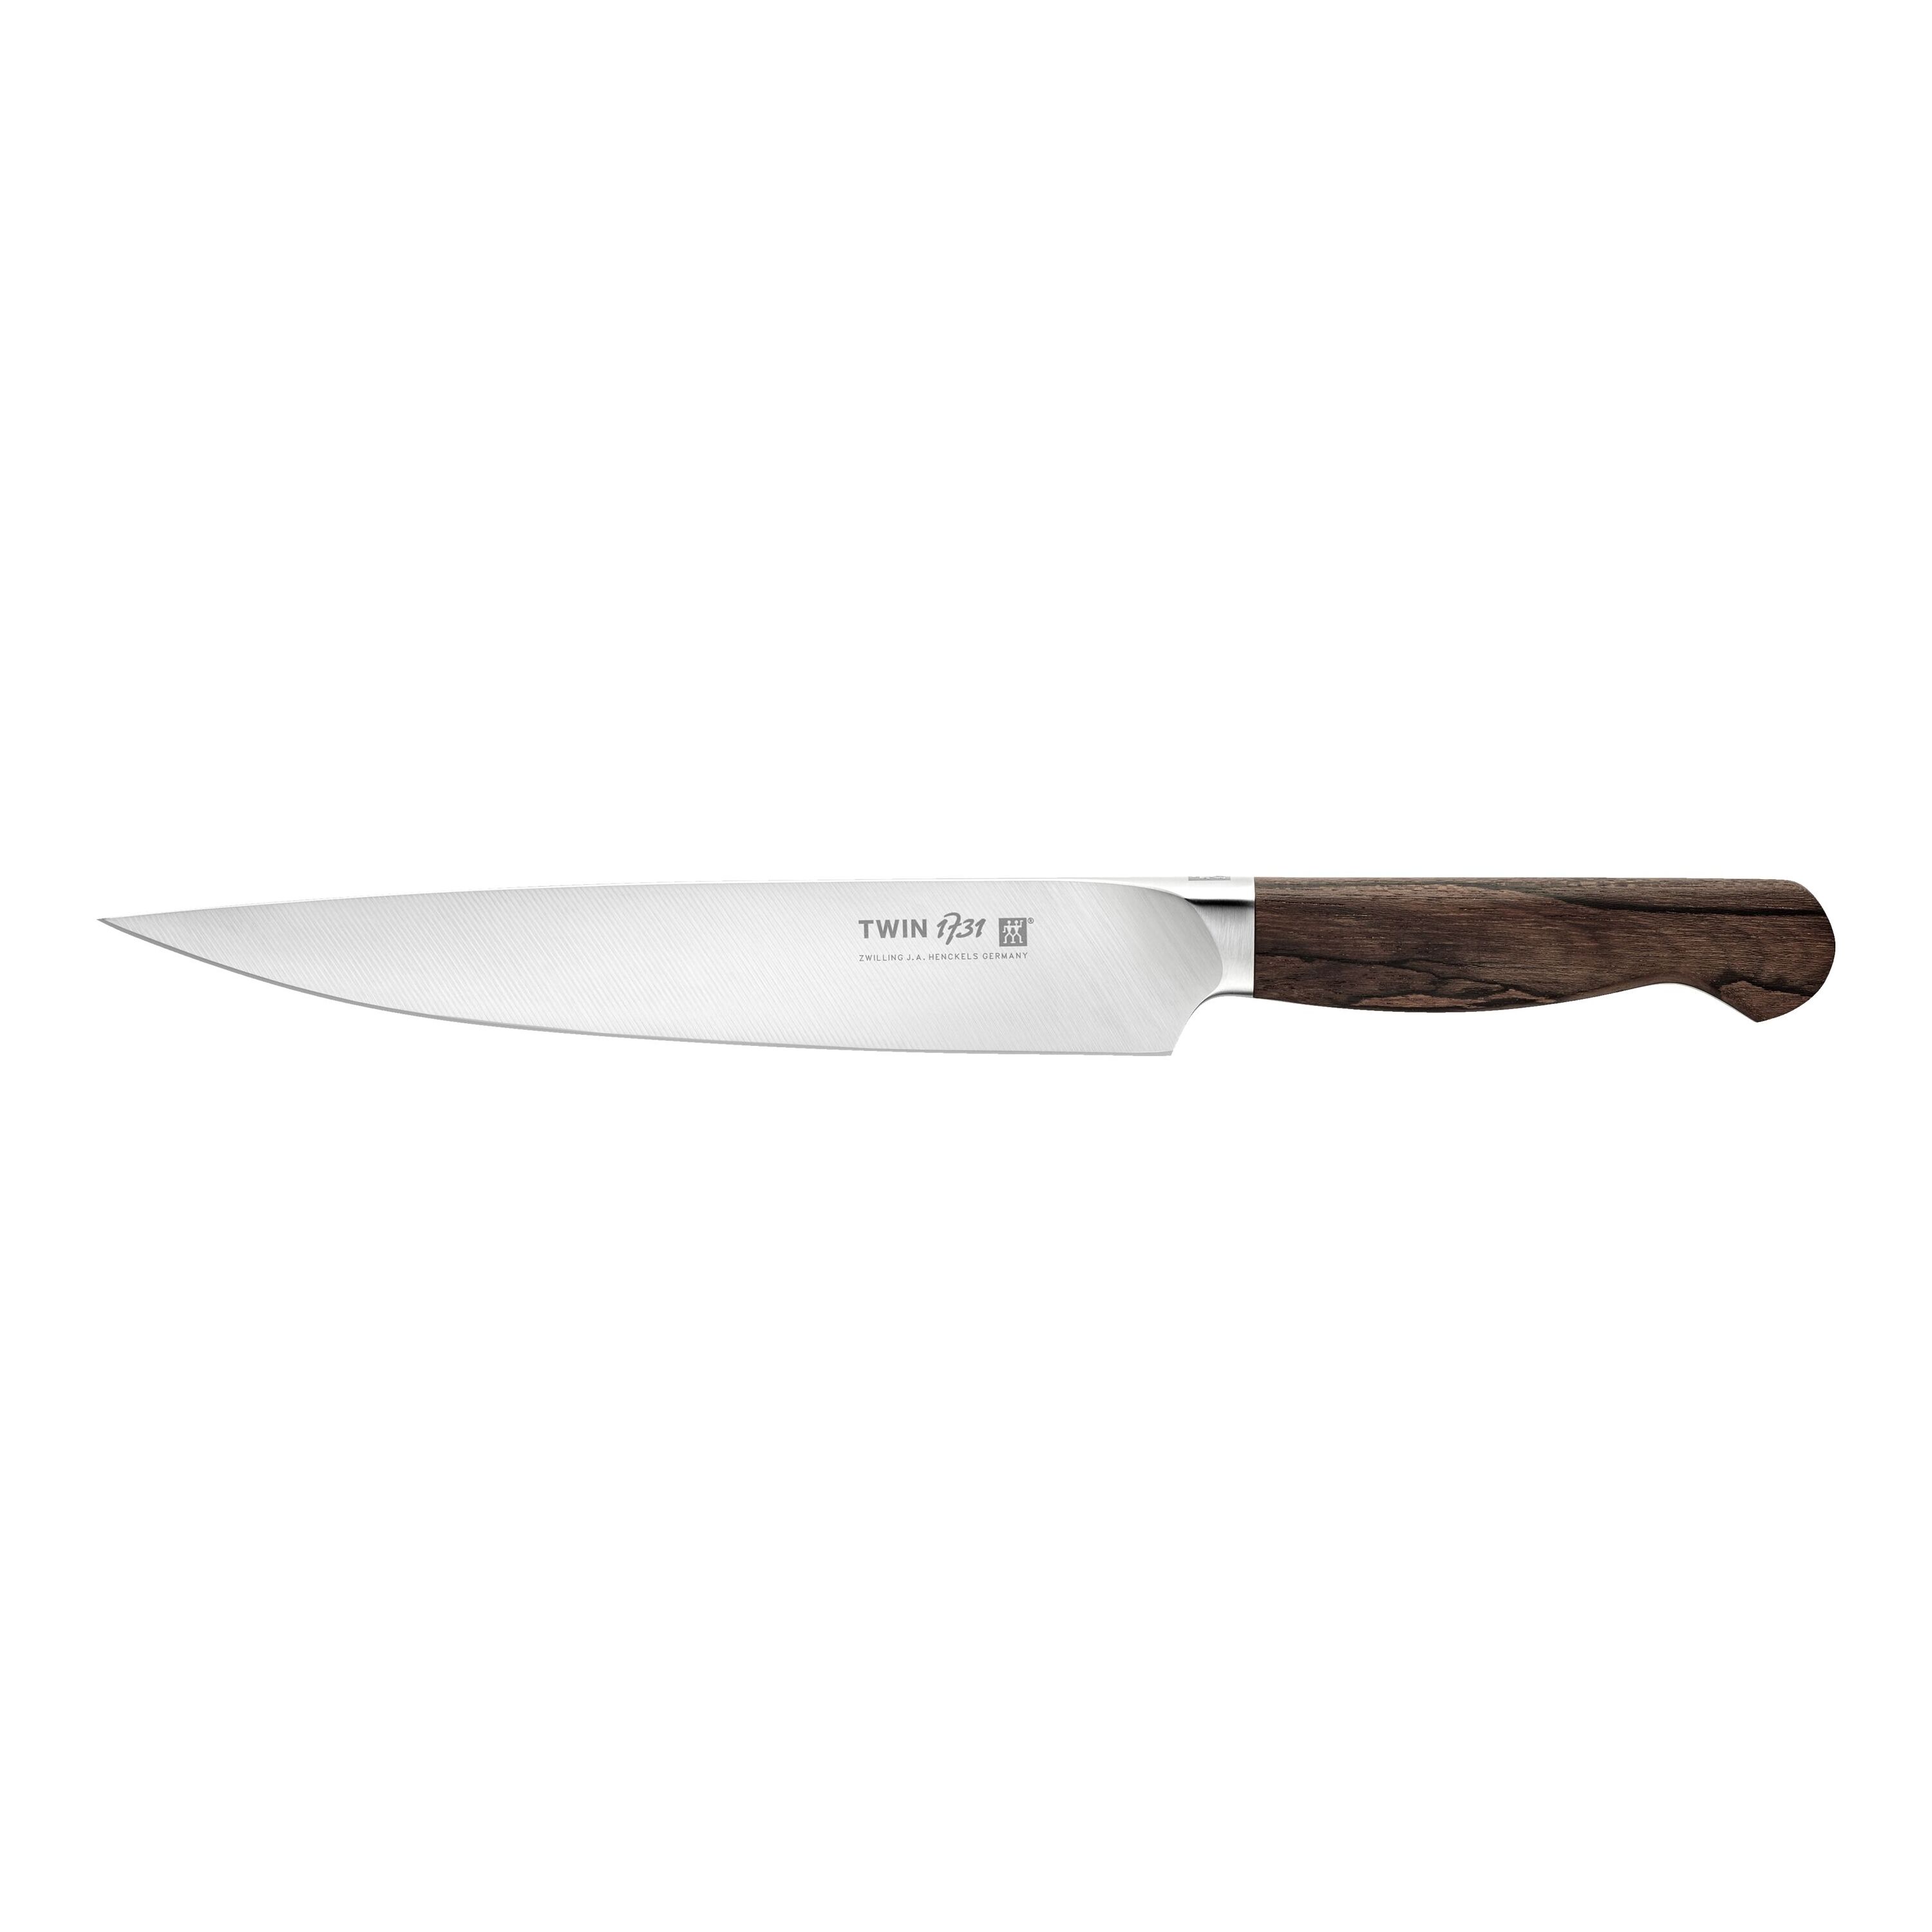 Buy ZWILLING TWIN 1731 Carving knife | ZWILLING.COM